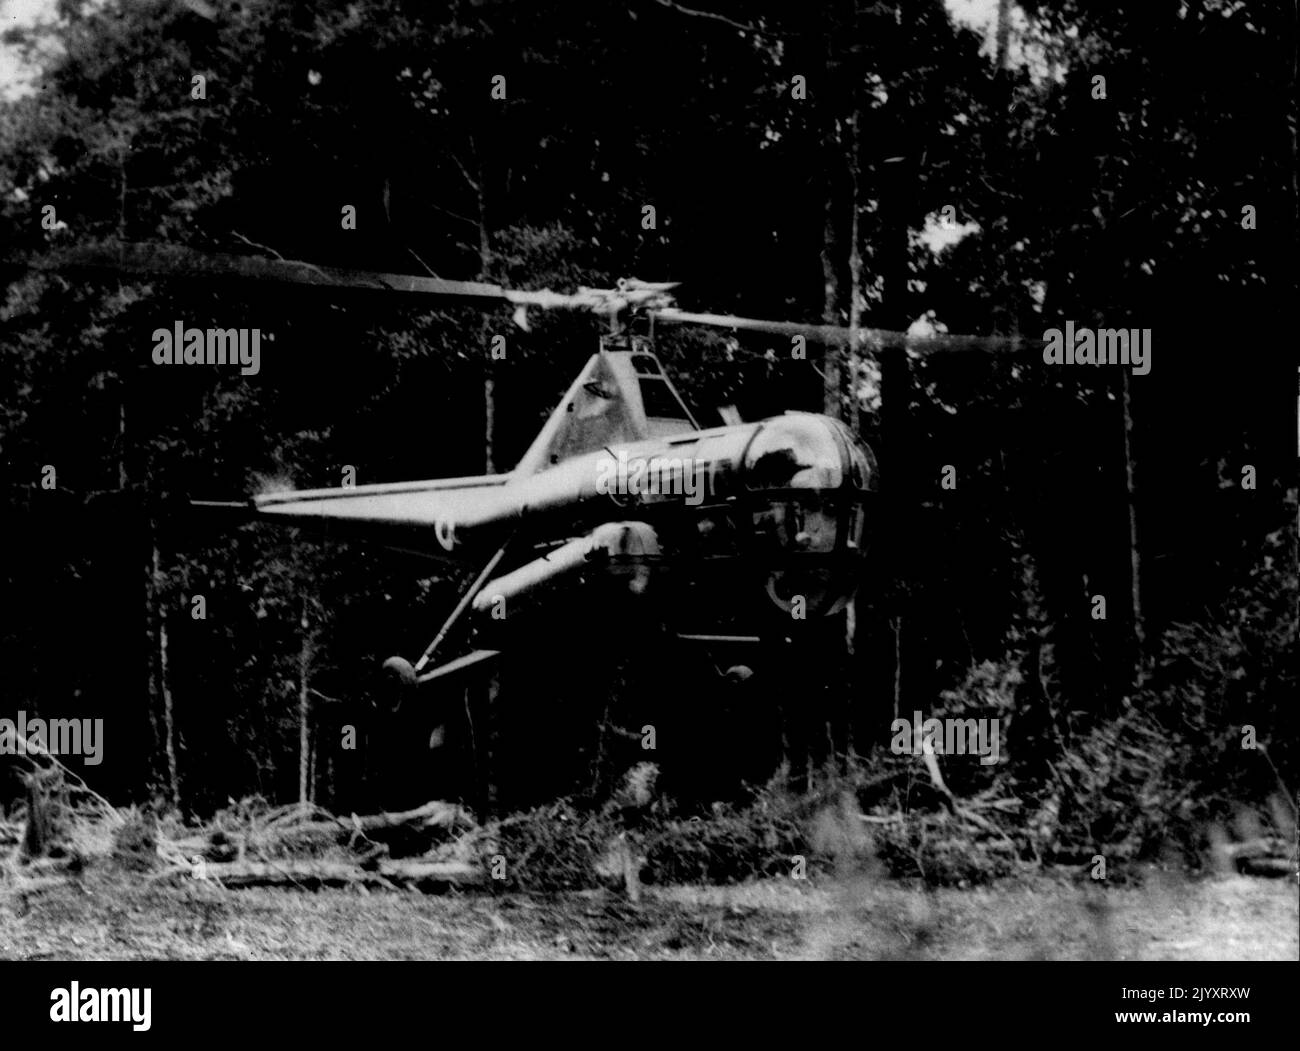 Helicopter Ambulance In Malaya -- The Royal Air Force helicopter air ambulances are rapidly nearing the end of their operational trails in Malaya. Here a Westland Sikorsky hoverfly 2 drops slowly to earth in a small jungle clearing hammed in by tall trees, its rotors barely clearing the jungle fringe. Clamped to the side is the stretcher bearing pannier which contains the wounded patient. Regular evacuation services are planned for the casualties suffered by the security forces in their anti-bandit fighting in the jungles of Malaya. July 18, 1950. (Photo by Associated Press Newsphoto). Stock Photo